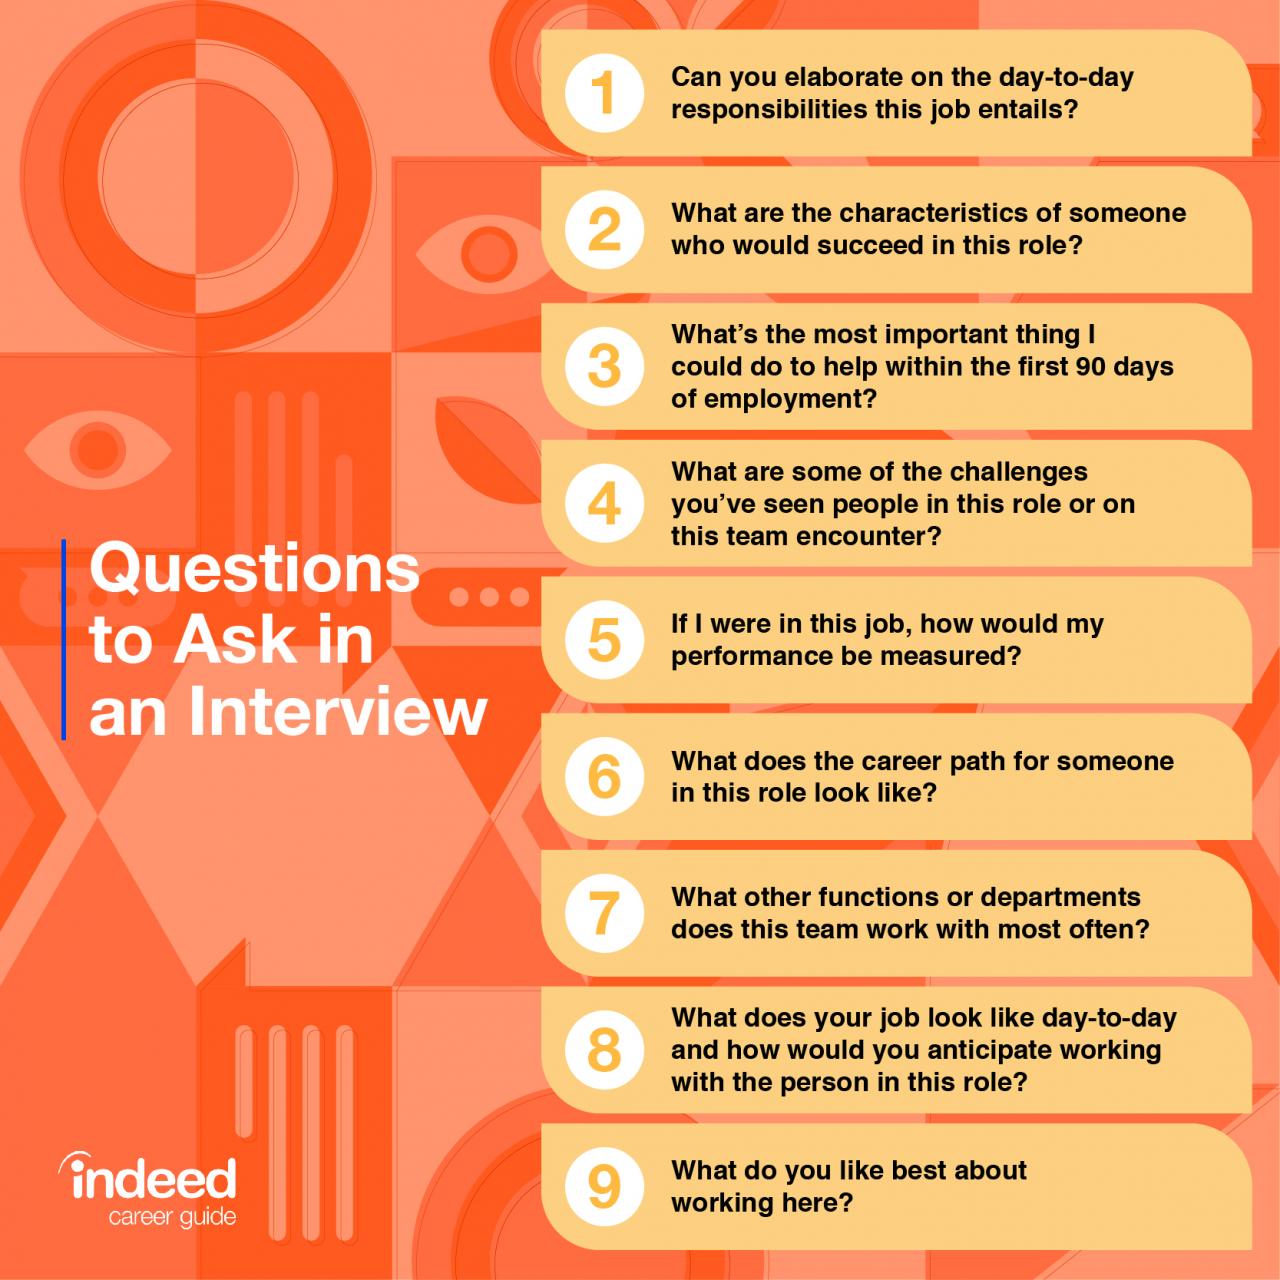 Good things to ask in an interview